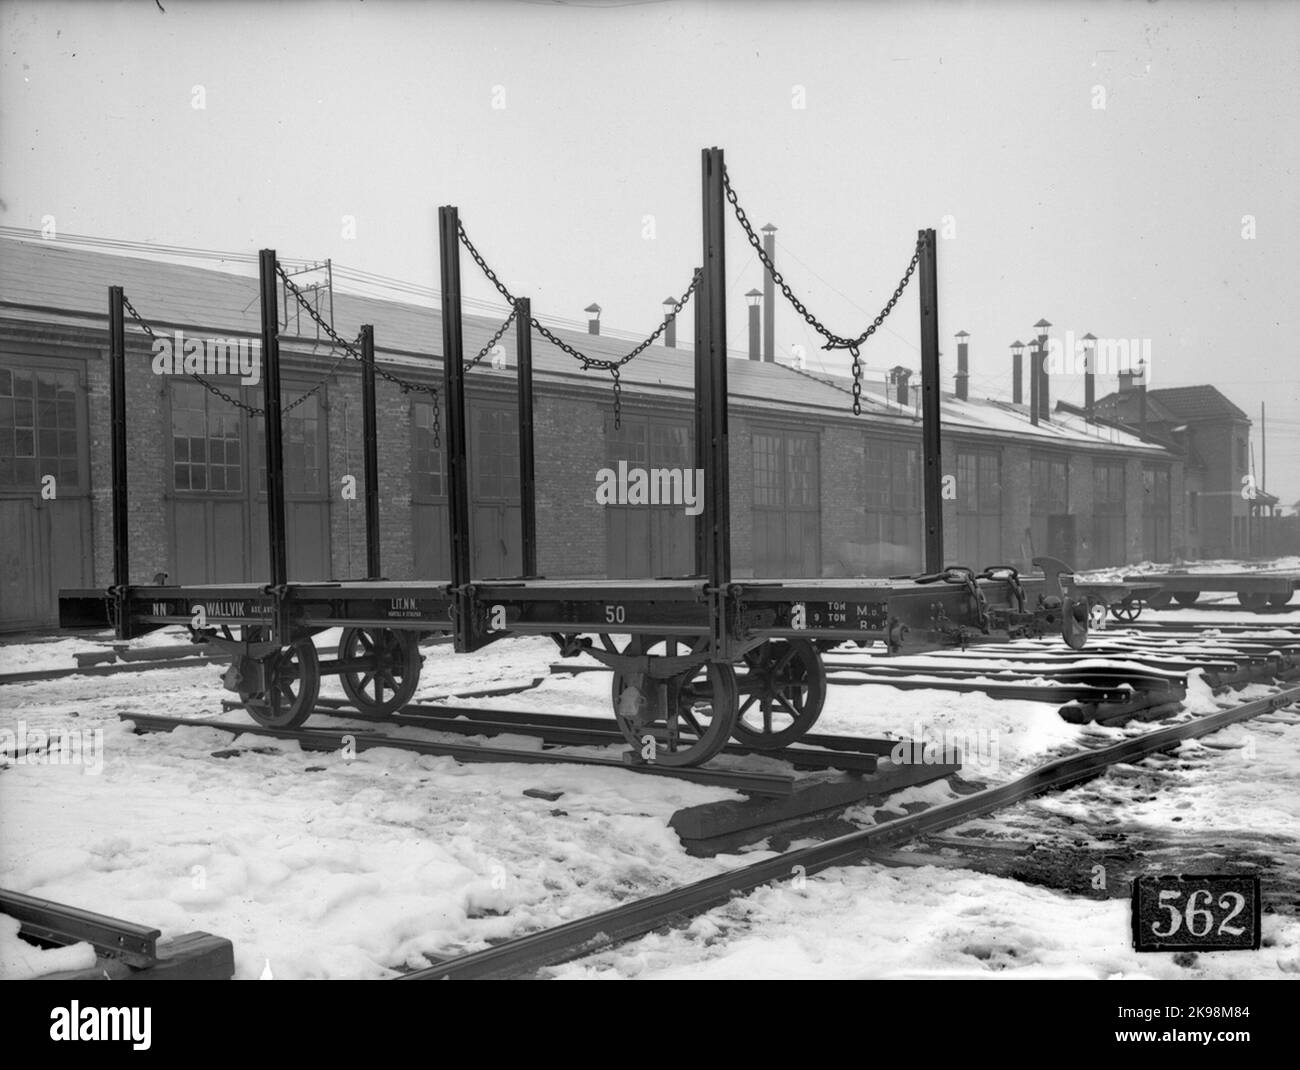 Freight wagon manufactured by the limited company Svenska Railway workshops, ASJ, for Sulfit AB Ljusnan, Vagnlittra NN 50. Stock Photo